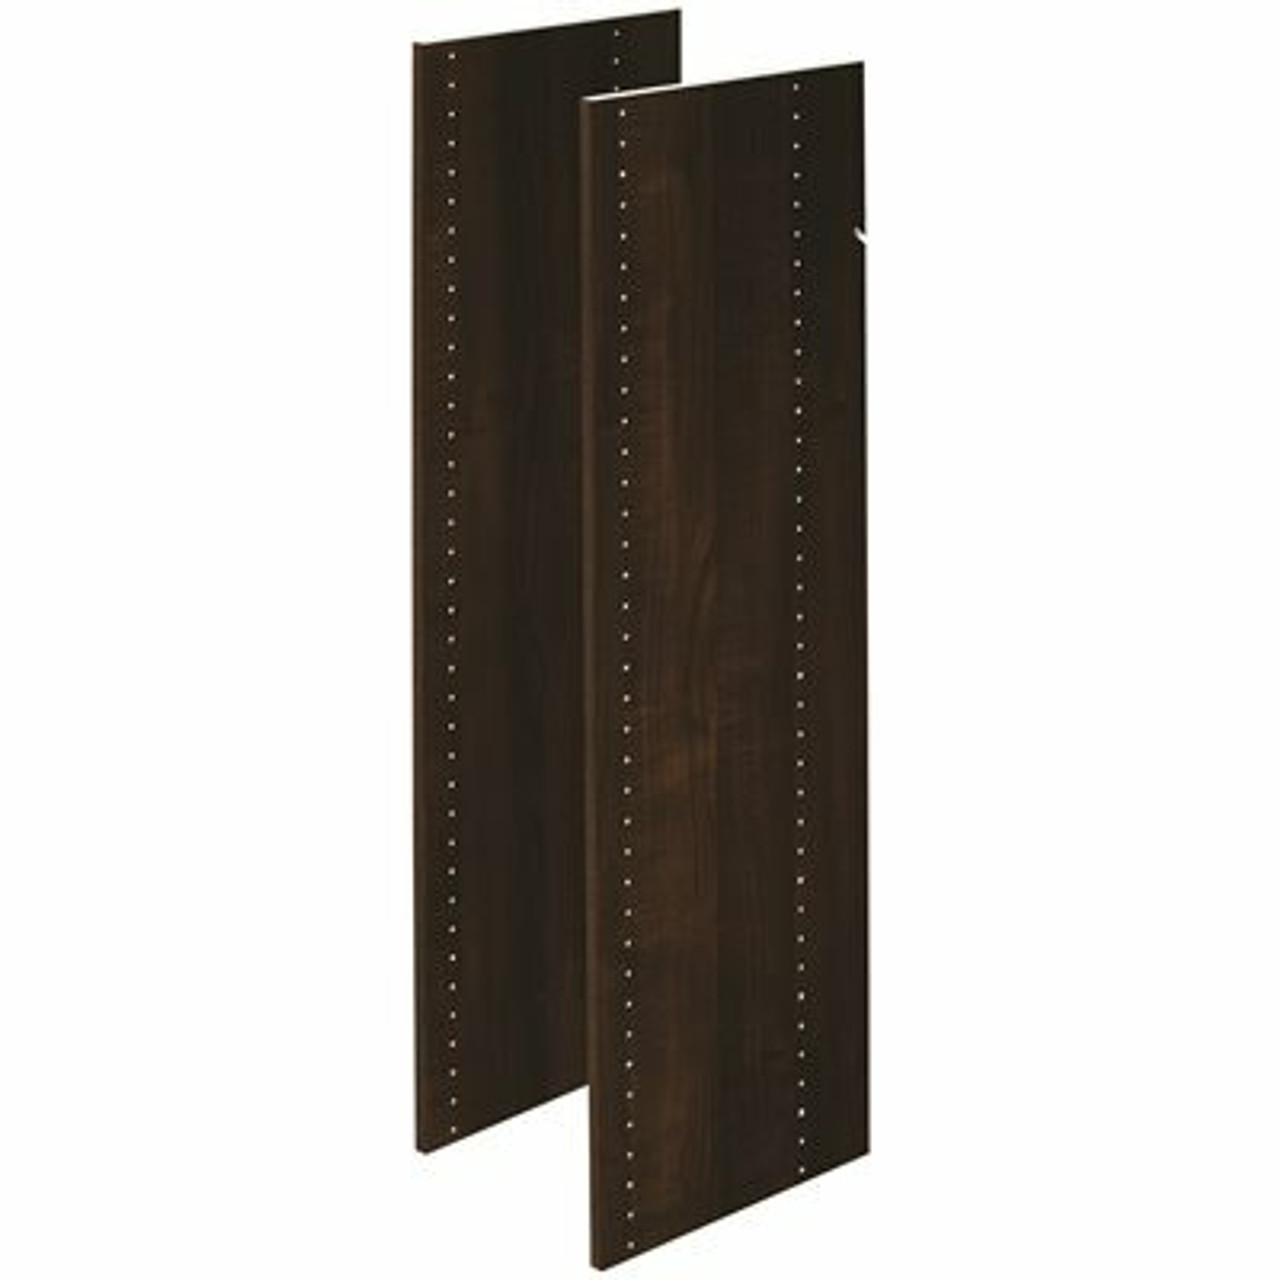 The Stow Company 48" Vertical Panels (2 Pack) - 3580576